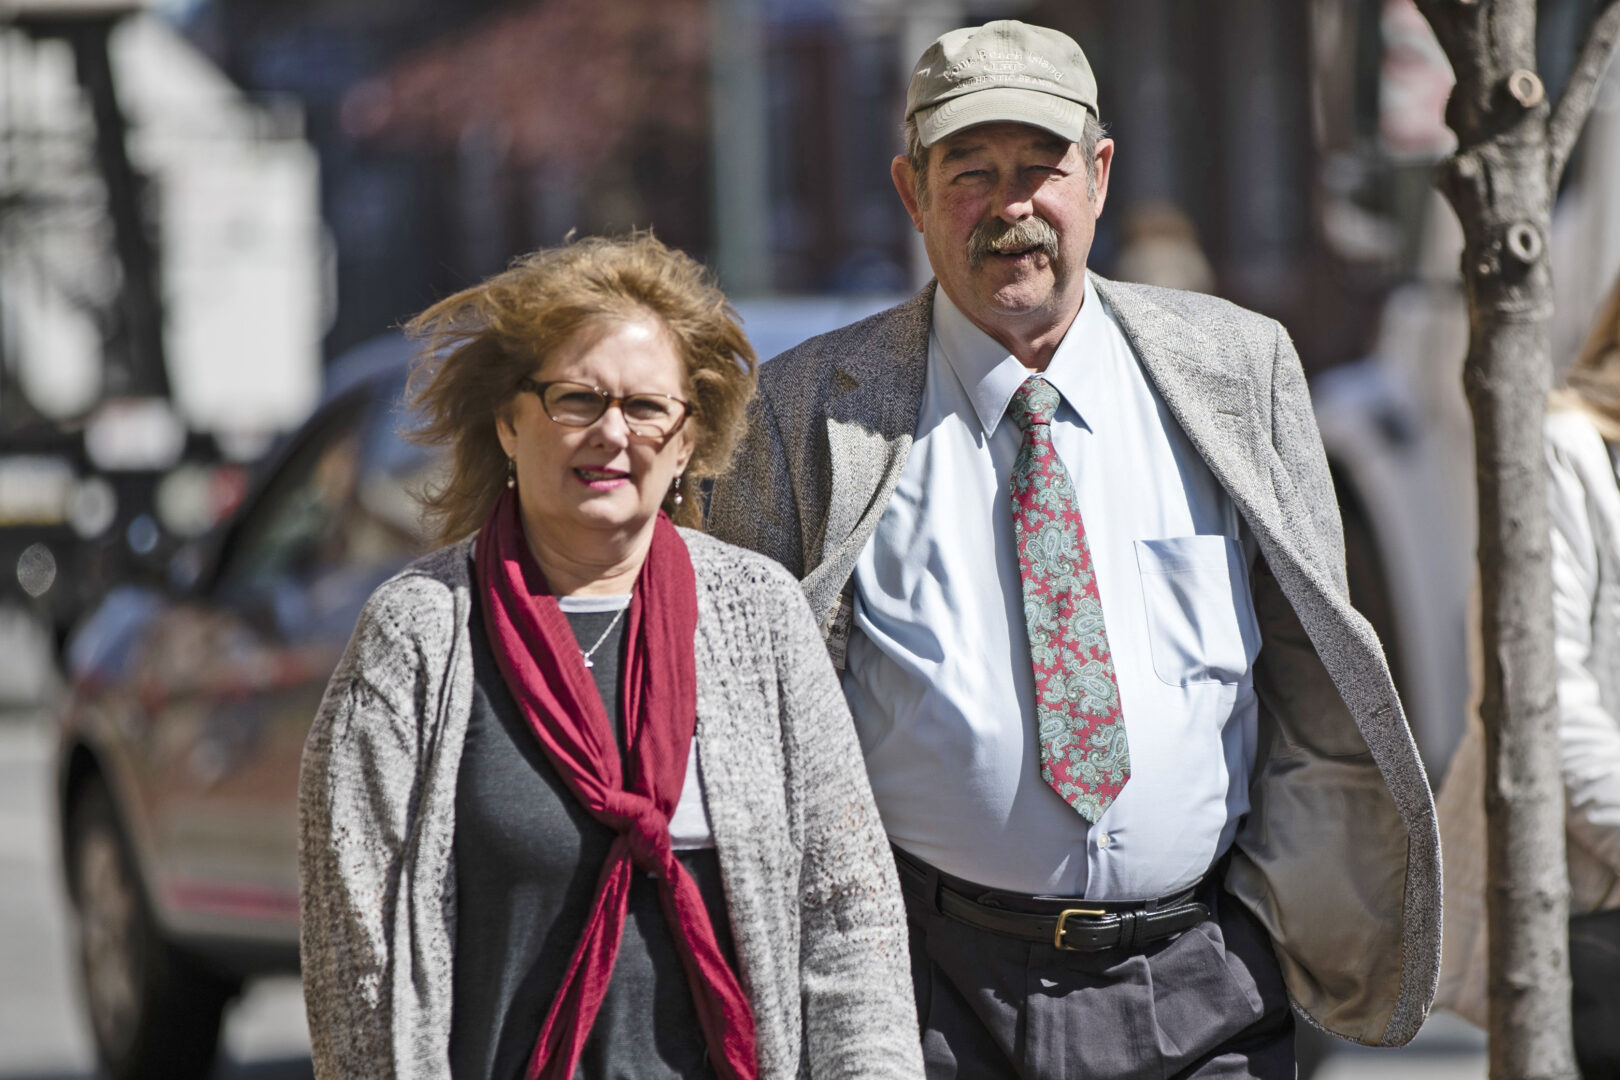 FILE – Deborah Frein, left, and Eugene Michael Frein, right, the parents of Eric Frein, walk to the Chester County Justice Center in West Chester, Pa., March 9, 2017. Pennsylvania may not keep a cache of weapons seized from the parents of Eric Frein, the gunman who killed one state trooper and permanently disabled another eight years ago, a federal appeals court ruled Tuesday, Aug. 30, 2022. Frein's parents sued after authorities refused to return 25 rifles, 10 pistols and two shotguns that were taken from their home in September 2014, days after Frein ambushed the troopers outside a state police barracks in the Pocono Mountains. (AP Photo/Matt Rourke, File)